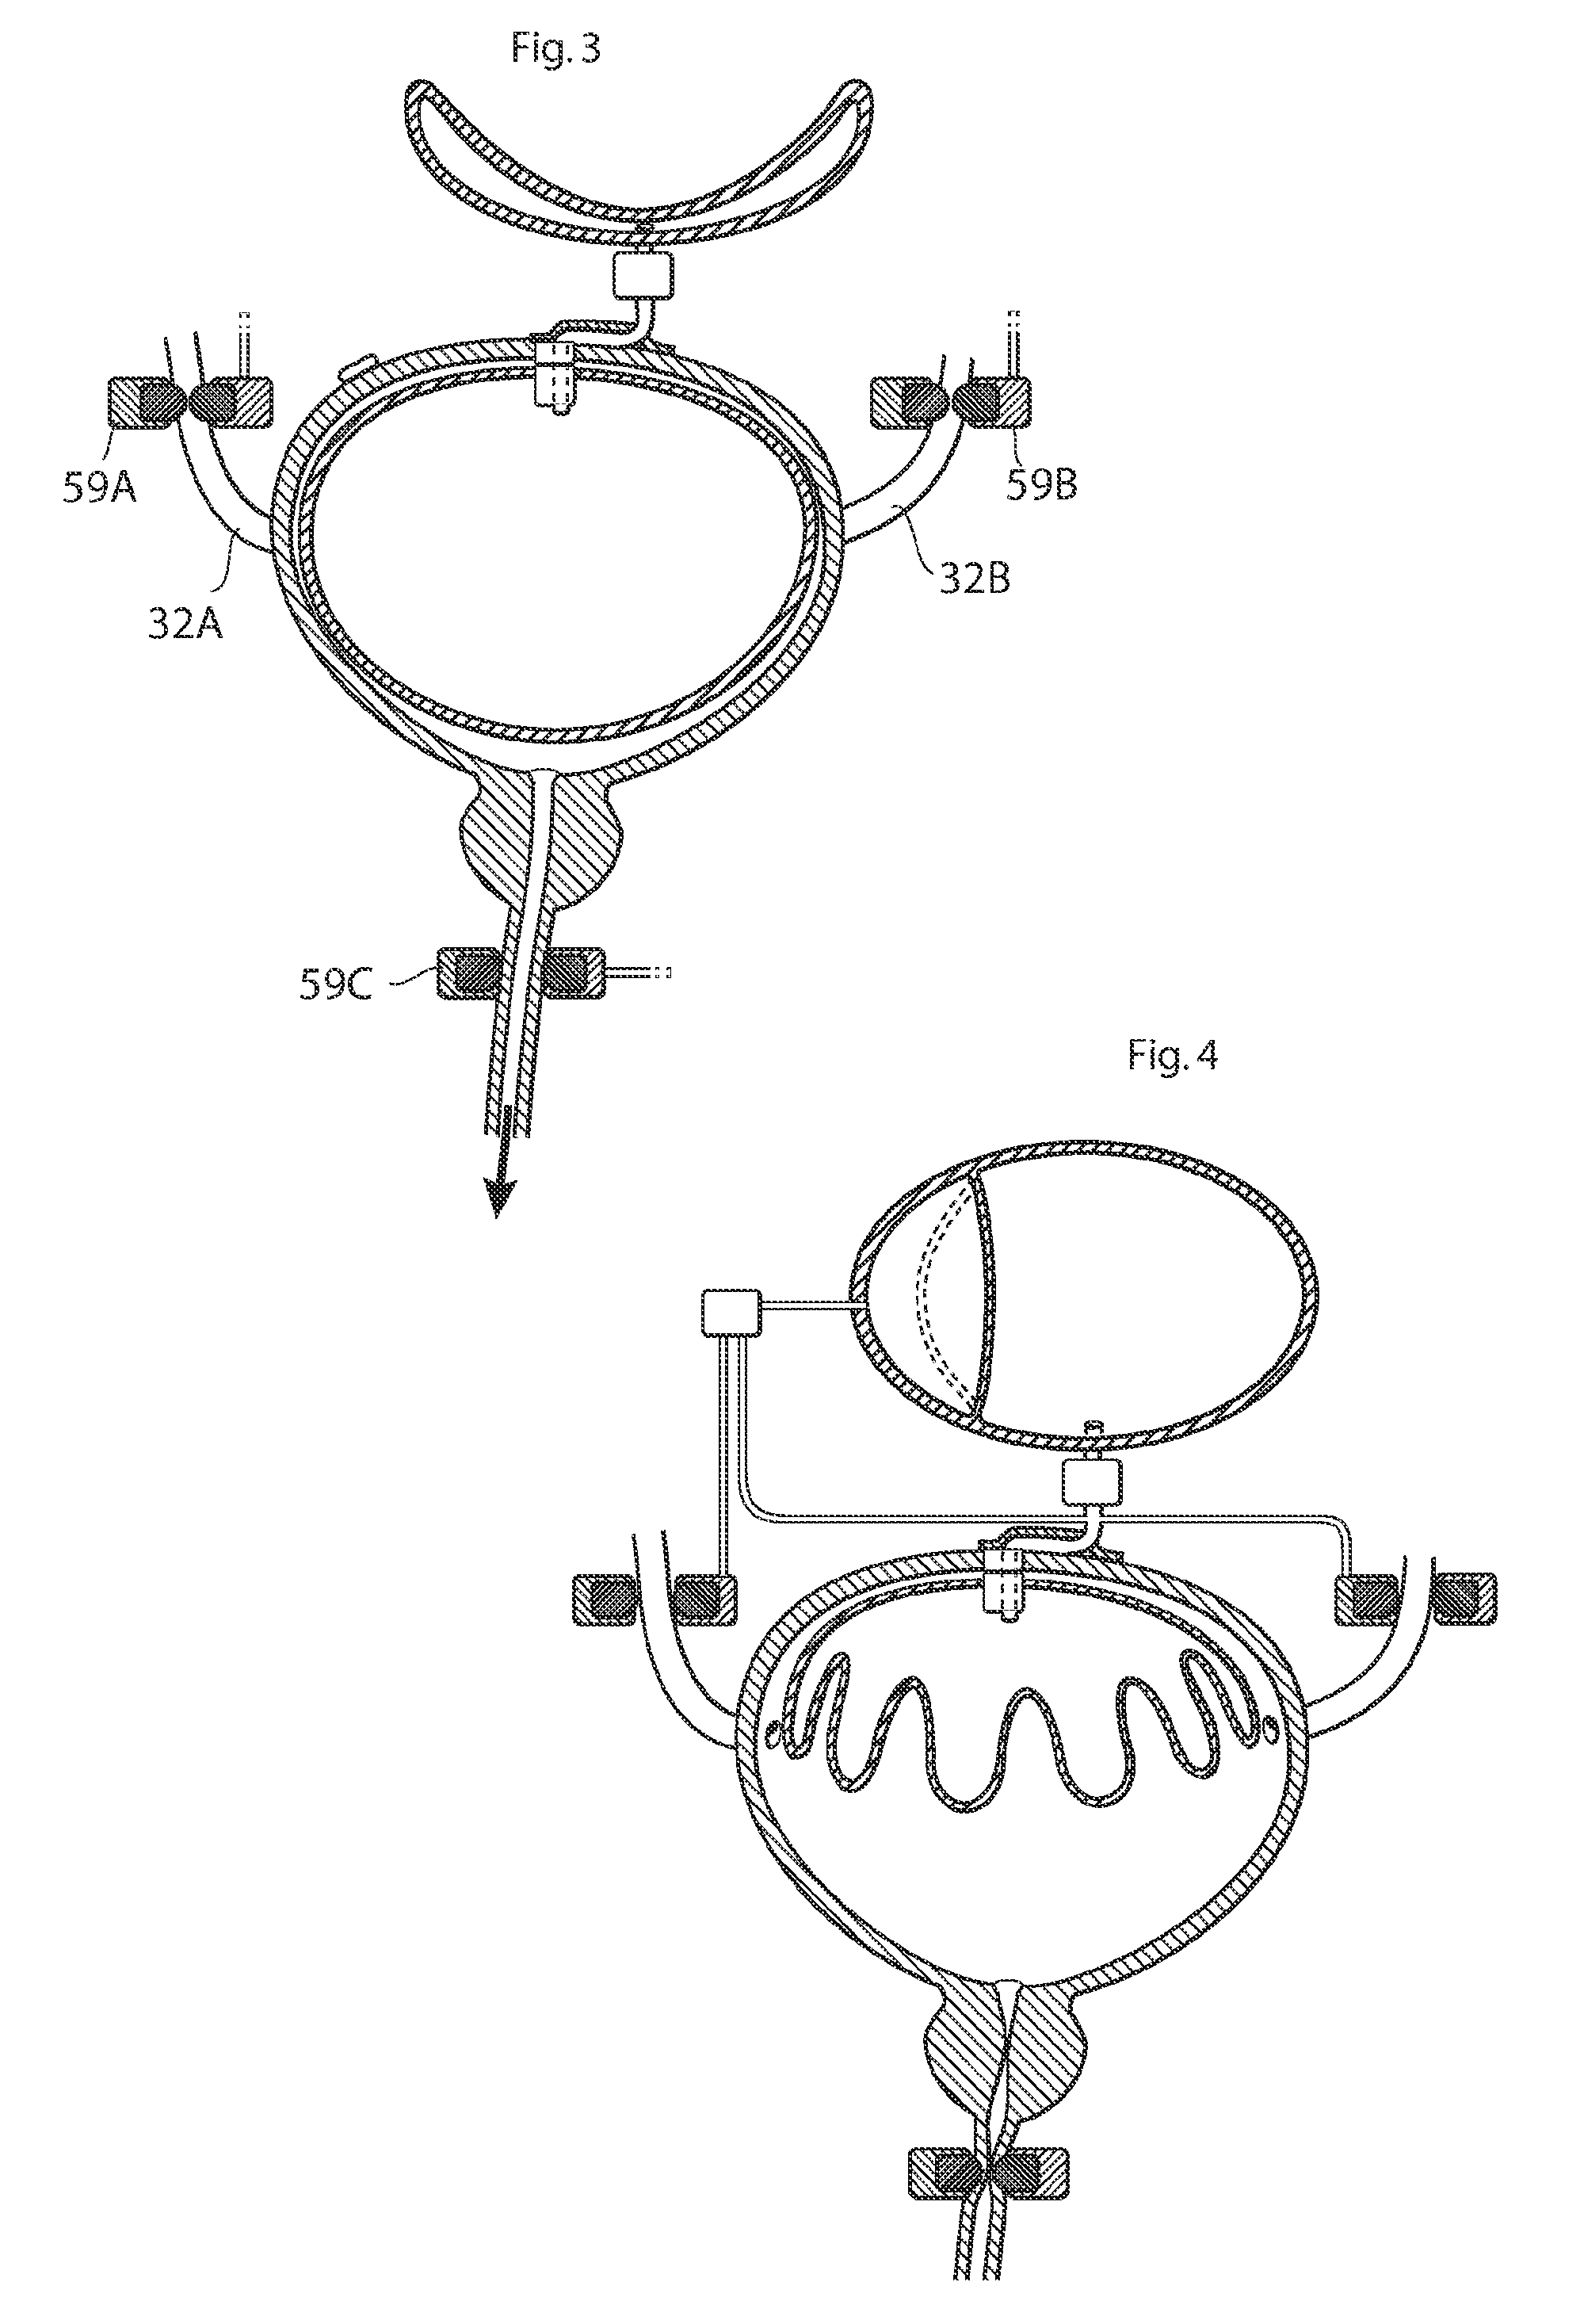 Implantable device for internal urinary control